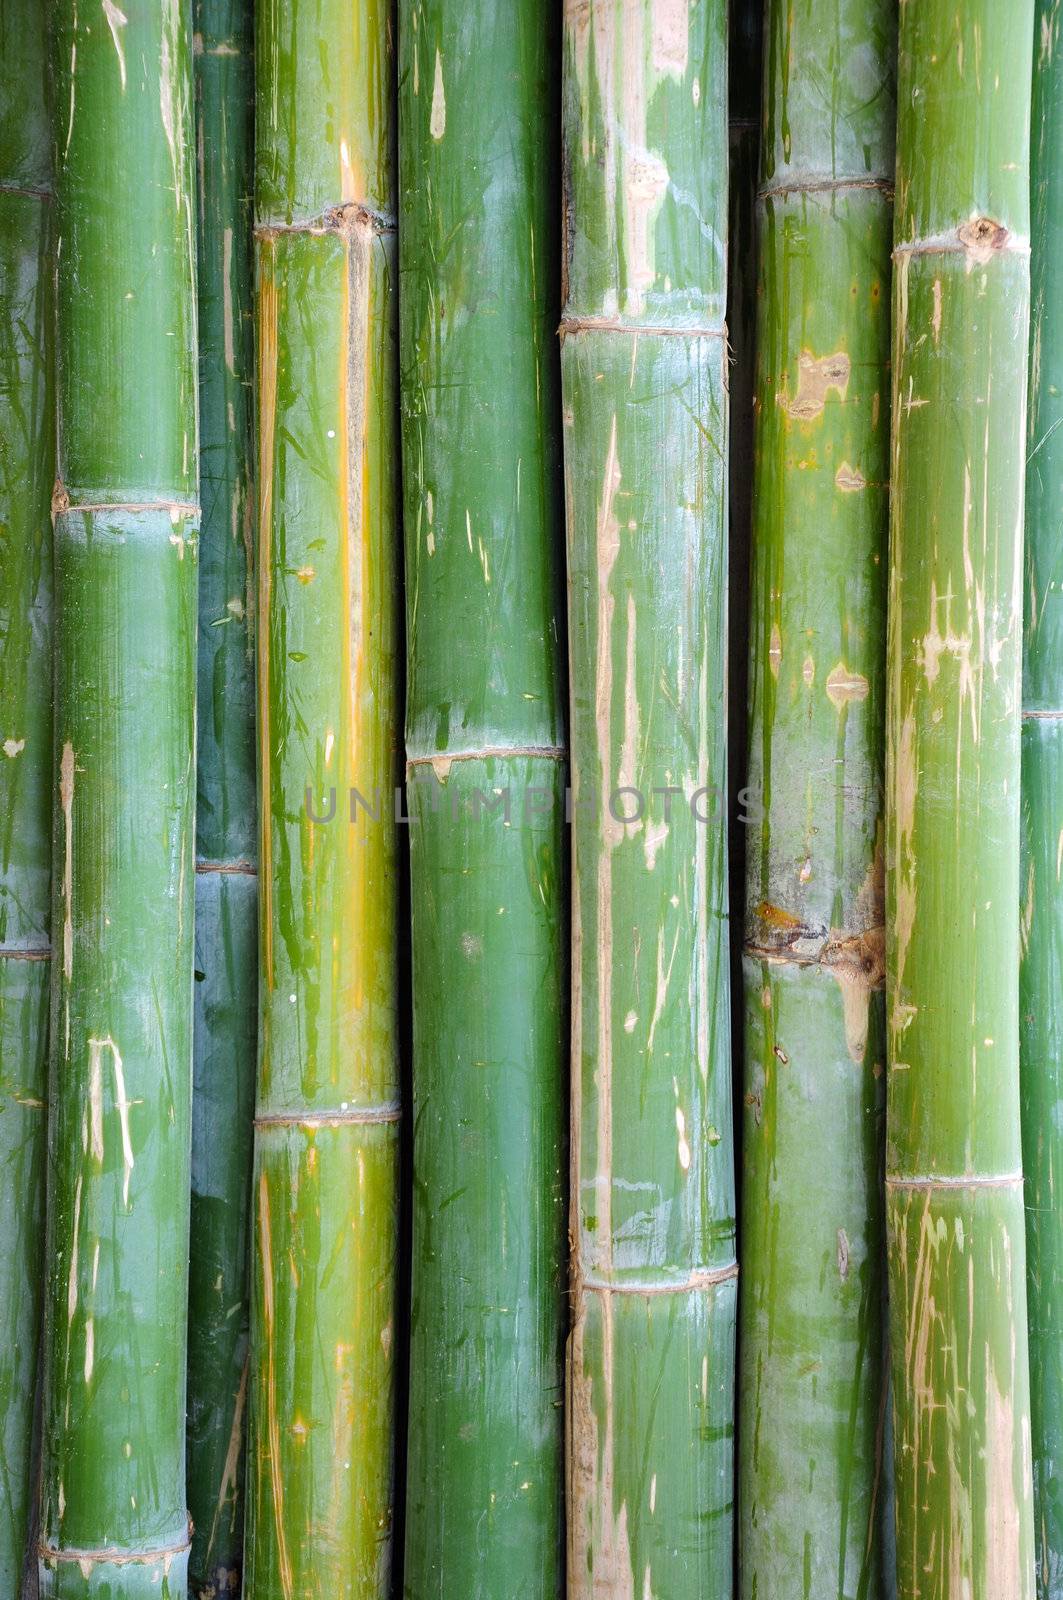 bamboo background by antpkr